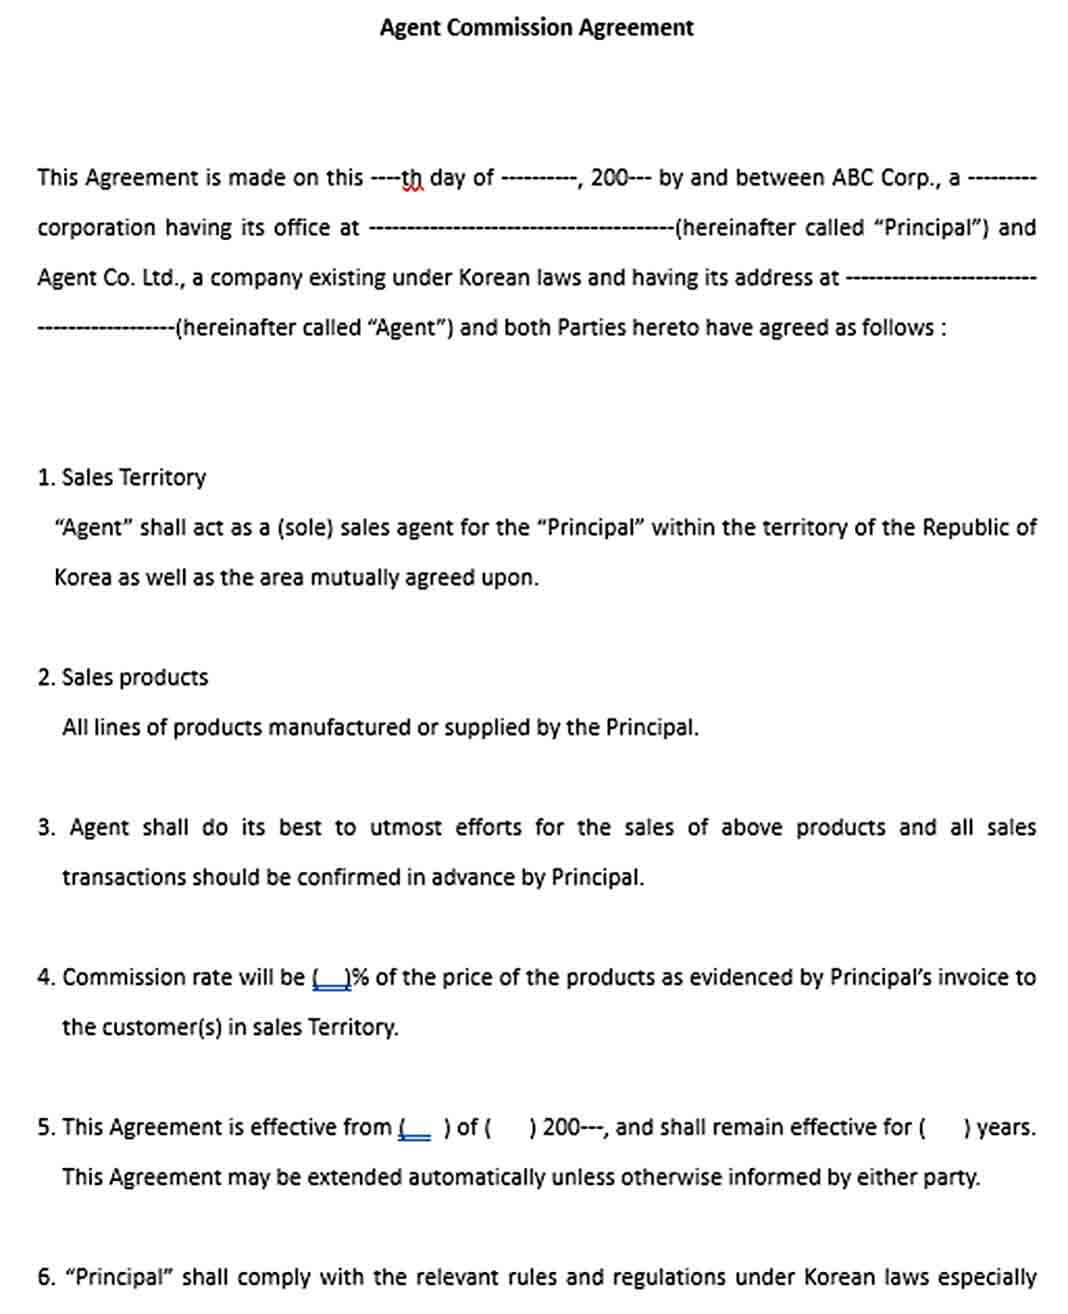 Sample Agent Commission Agreement Template